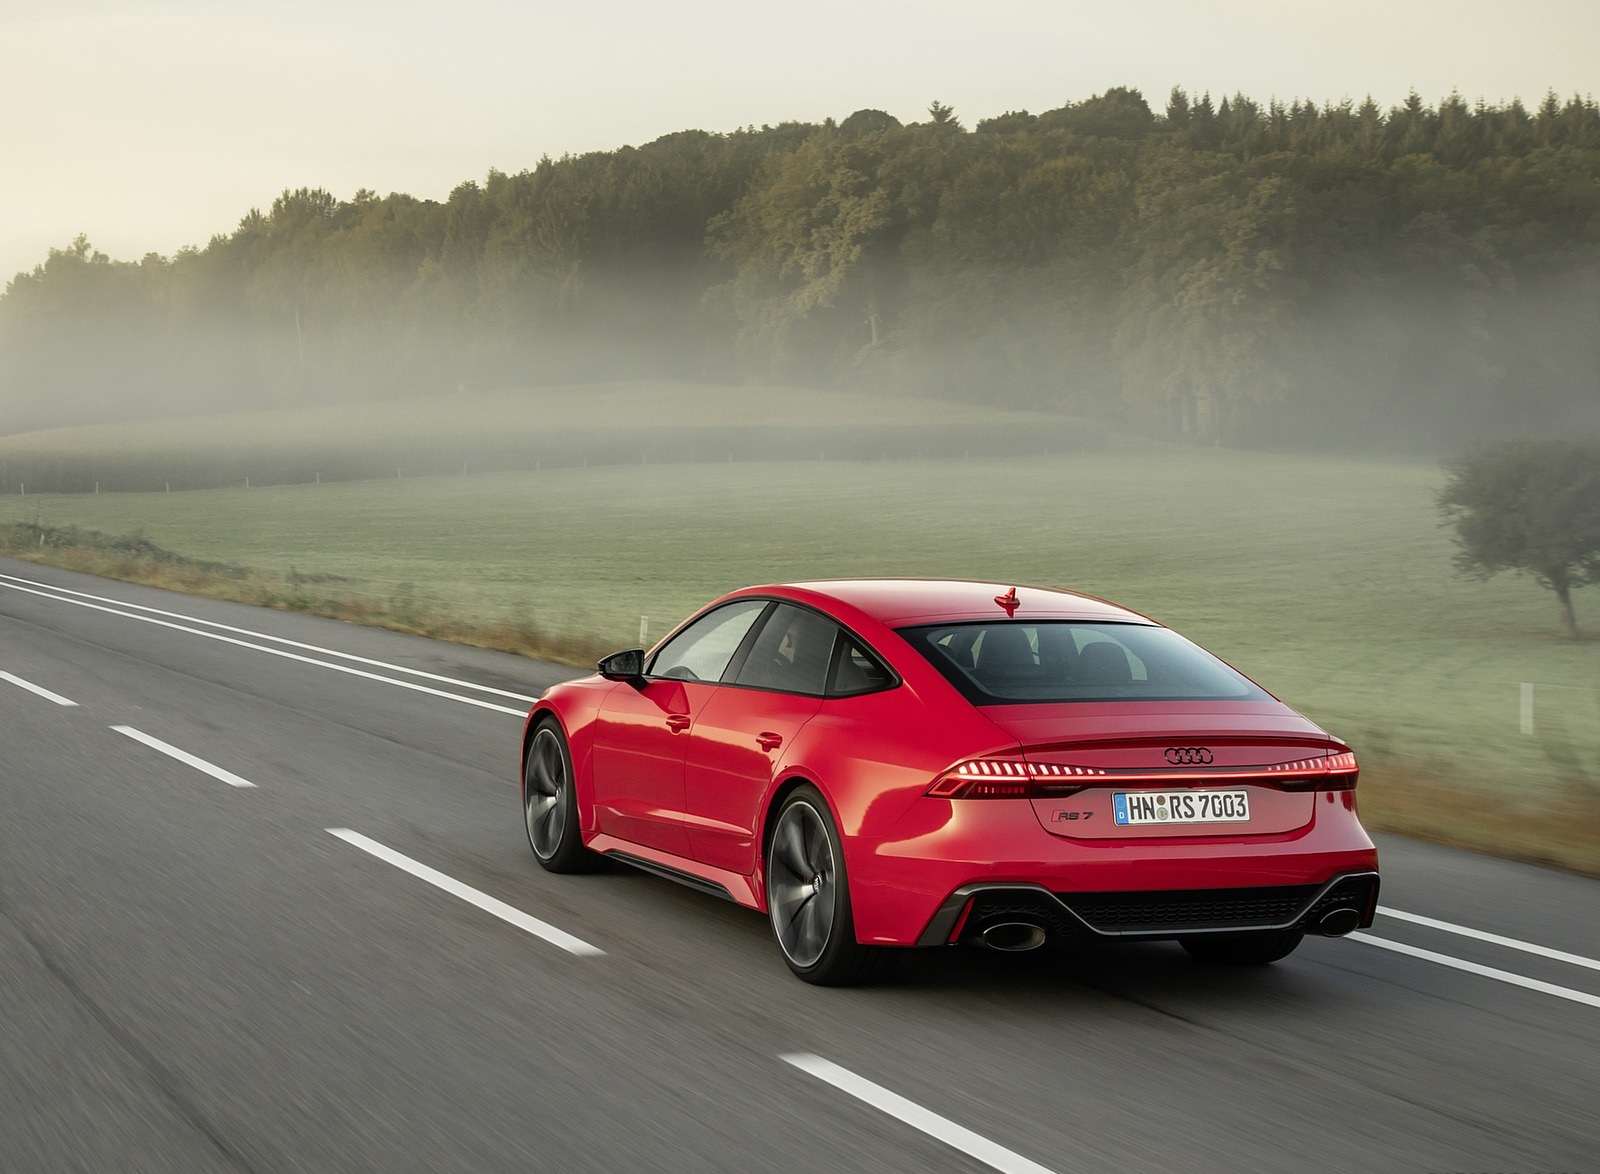 2020 Audi RS 7 Sportback (Color: Tango Red) Rear Three-Quarter Wallpapers #18 of 99